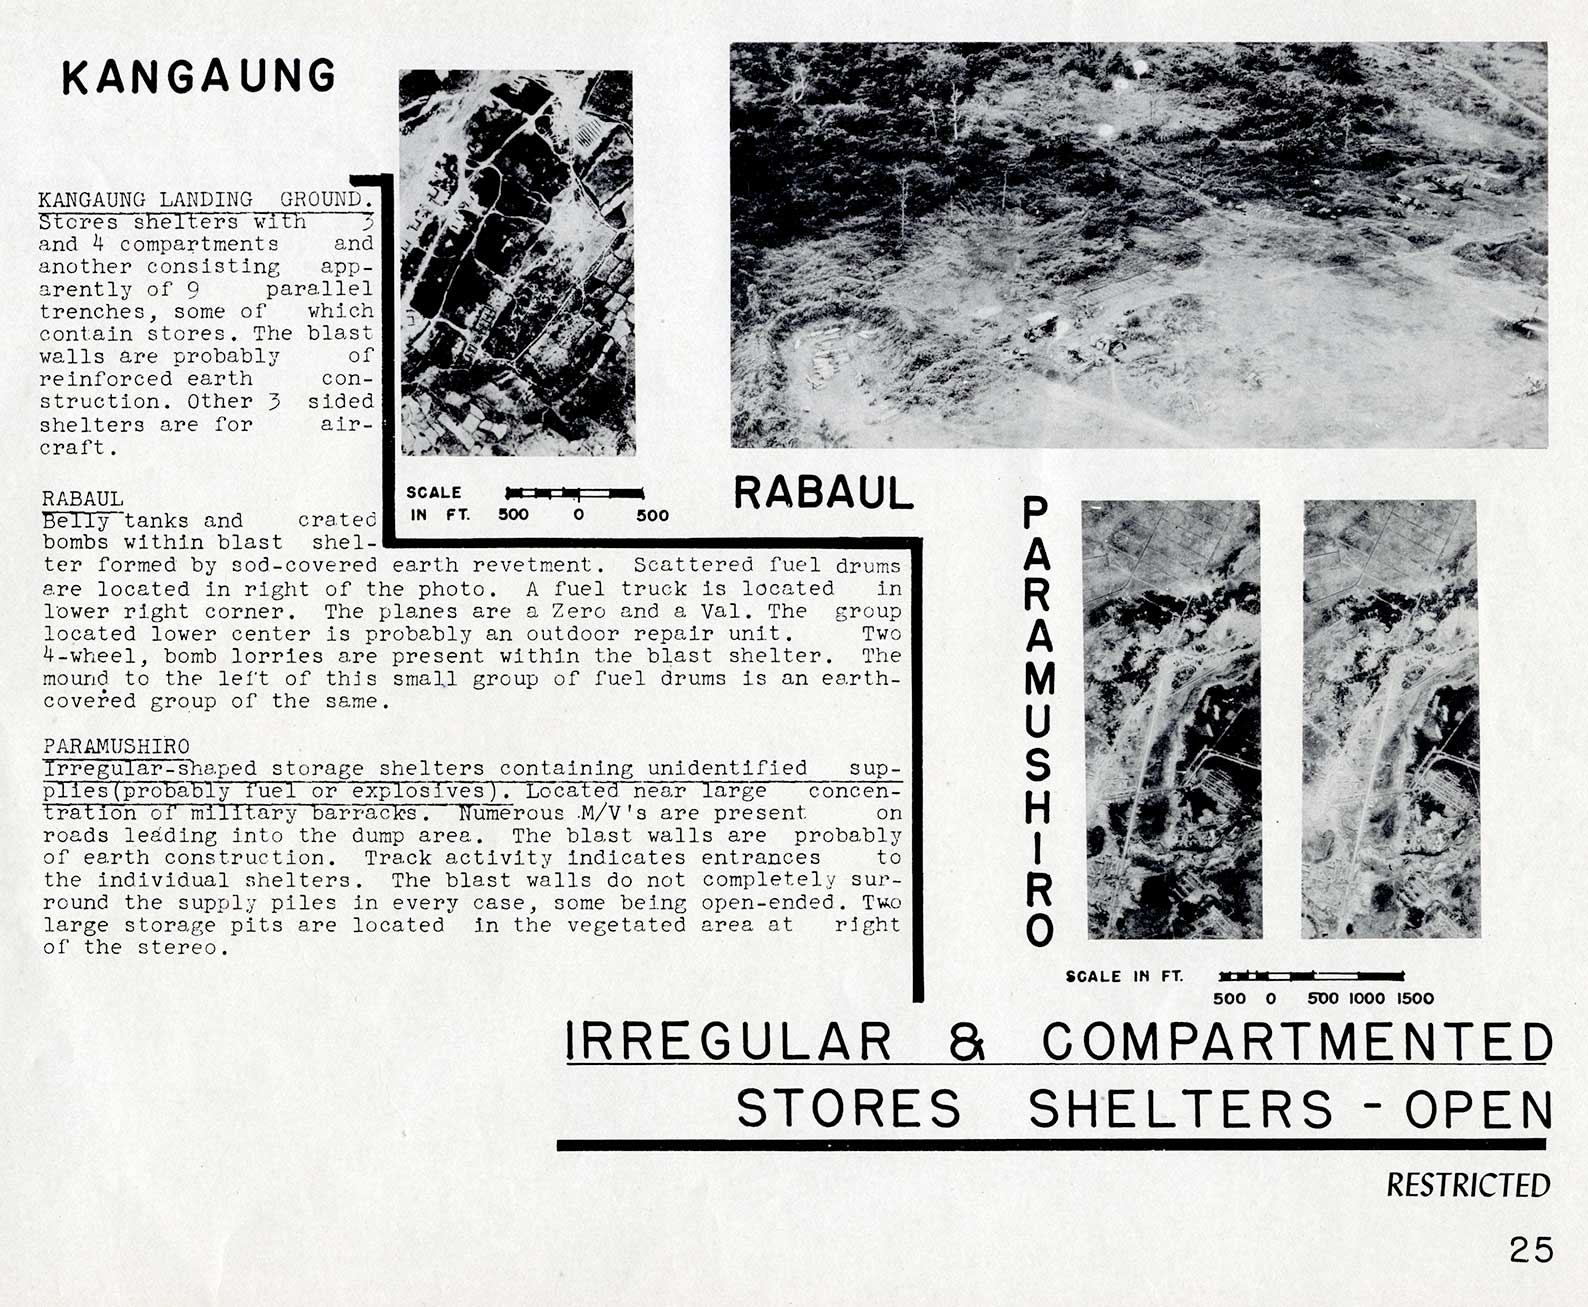 IRREGULAR and COMPARTMENTED STORES SHELTERS - OPEN
KANGAUNG LANDING GROUND. Stores shelters with and 4 compartments and another consisting apparently of 9 parallel trenches, some of which contain stores. The blast walls are probably of reinforced earth construction. Other 3 sided shelters are for aircraft.

RABAUL 
Belly tanks and crated bombs within blast shelter formed by sod-covered earth revetment. Scattered fuel drums are located in right of the photo. A fuel truck is located in lower right corner. The planes are a Zero and a Val. The group located lower center is probably an outdoor repair unit. Two 4-wheel, bomb lorries are present within the blast shelter. The mound to the left of this small group of fuel drums is an earth-covered group of the same.

PARAMUSHIRO
Irregular-shaped storage shelters containing unidentified supplies (probably fuel or explosives). Located near large concentration of military barracks. Numerous M/V's are present on roads leading into the dump area. The blast walls are probably of earth construction. Track activity indicates entrances to the individual shelters. The blast walls do not completely surround the supply piles in every case, some being open-ended. Two large storage pits are located in the vegetated area at right of the stereo.
25
